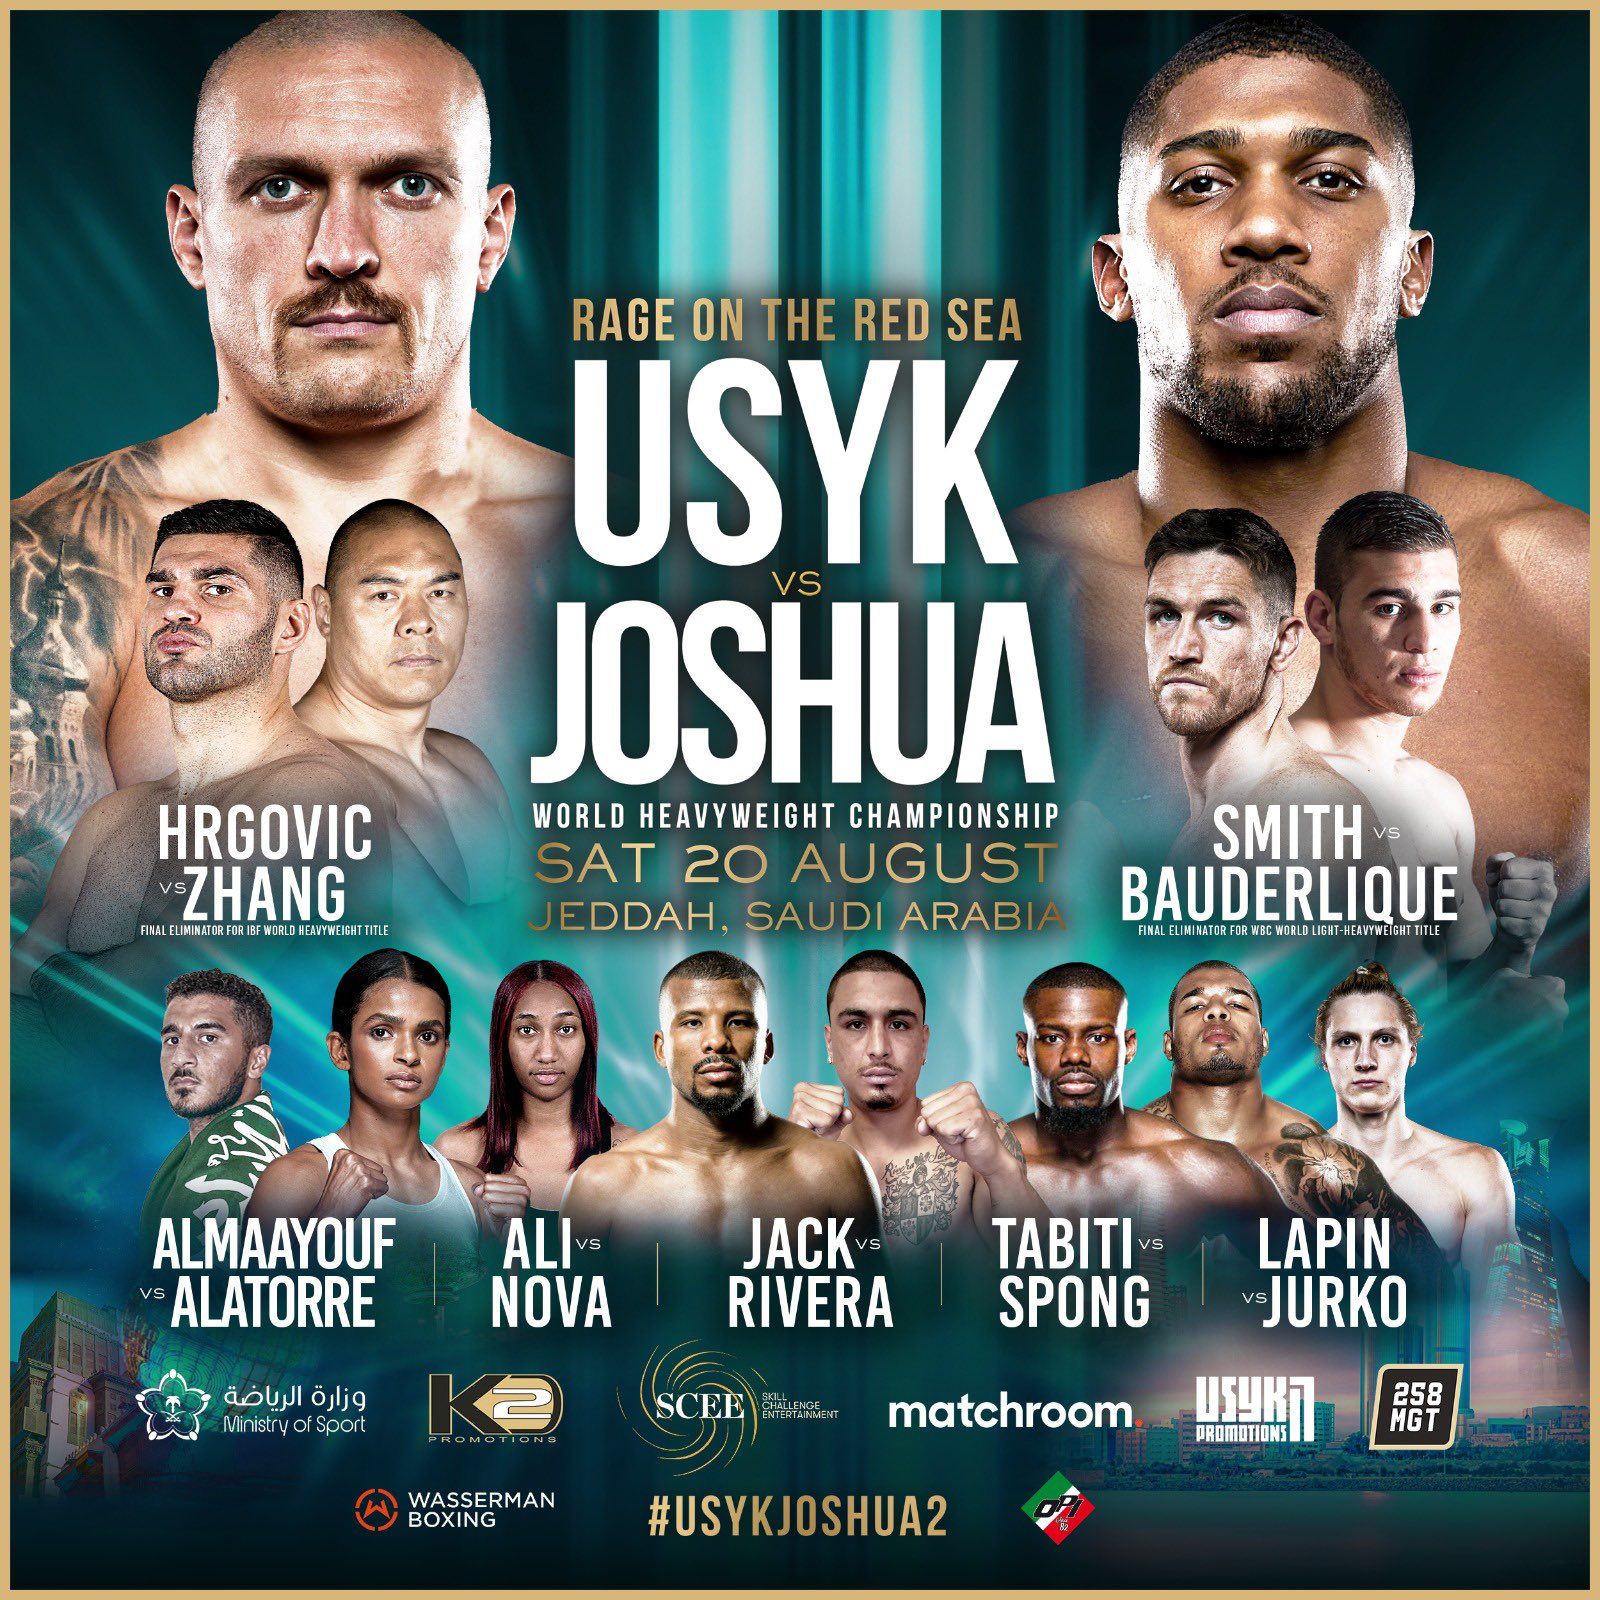 RAGE ON THE RED SEA USYK VS